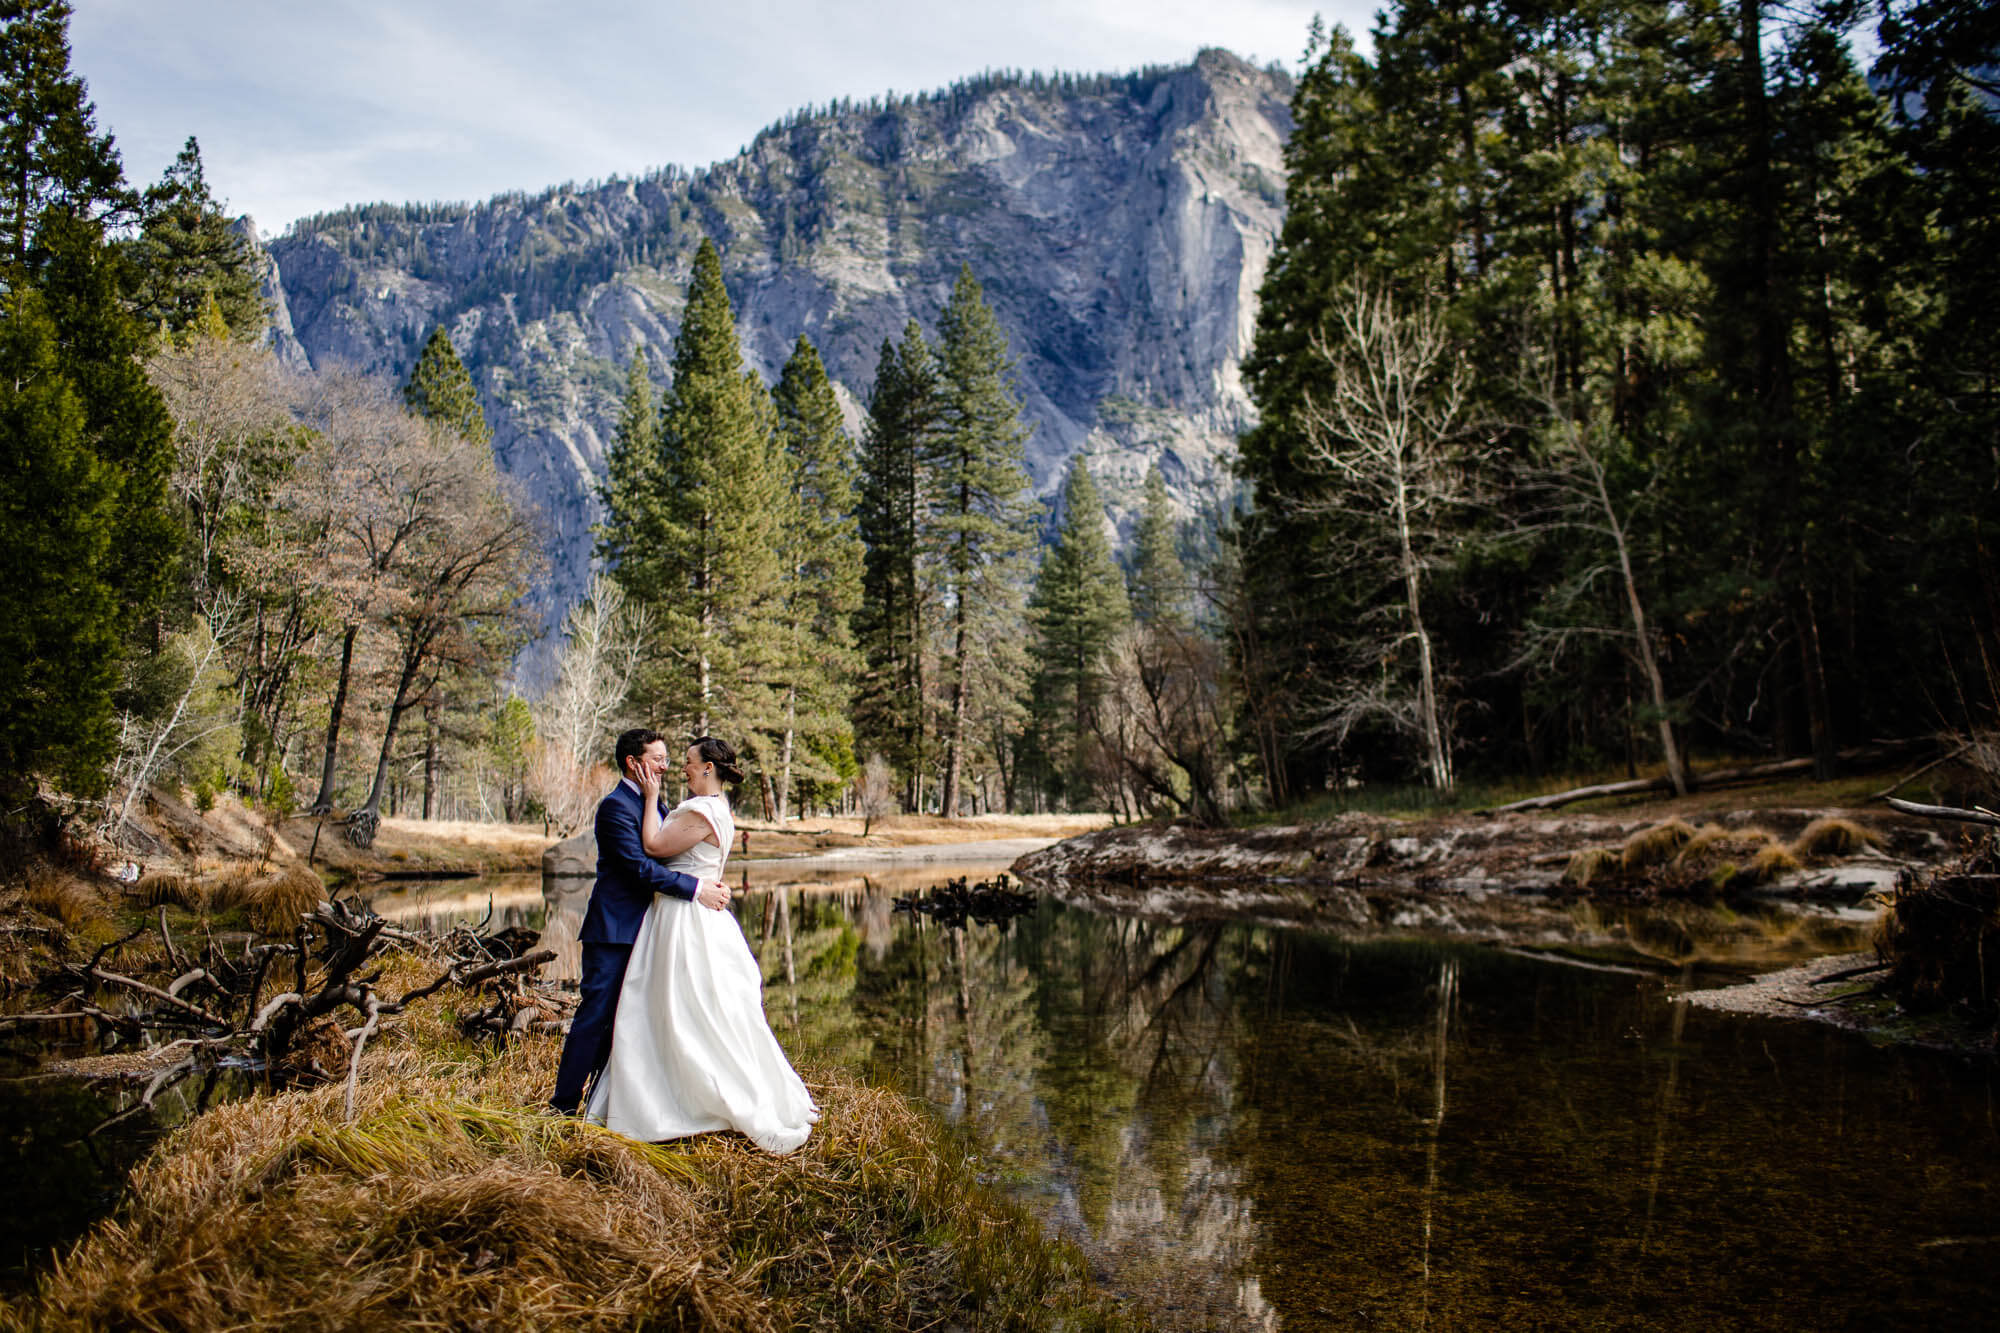 Bride and groom kiss while standing on an island in the Merced River in Yosemite Valley